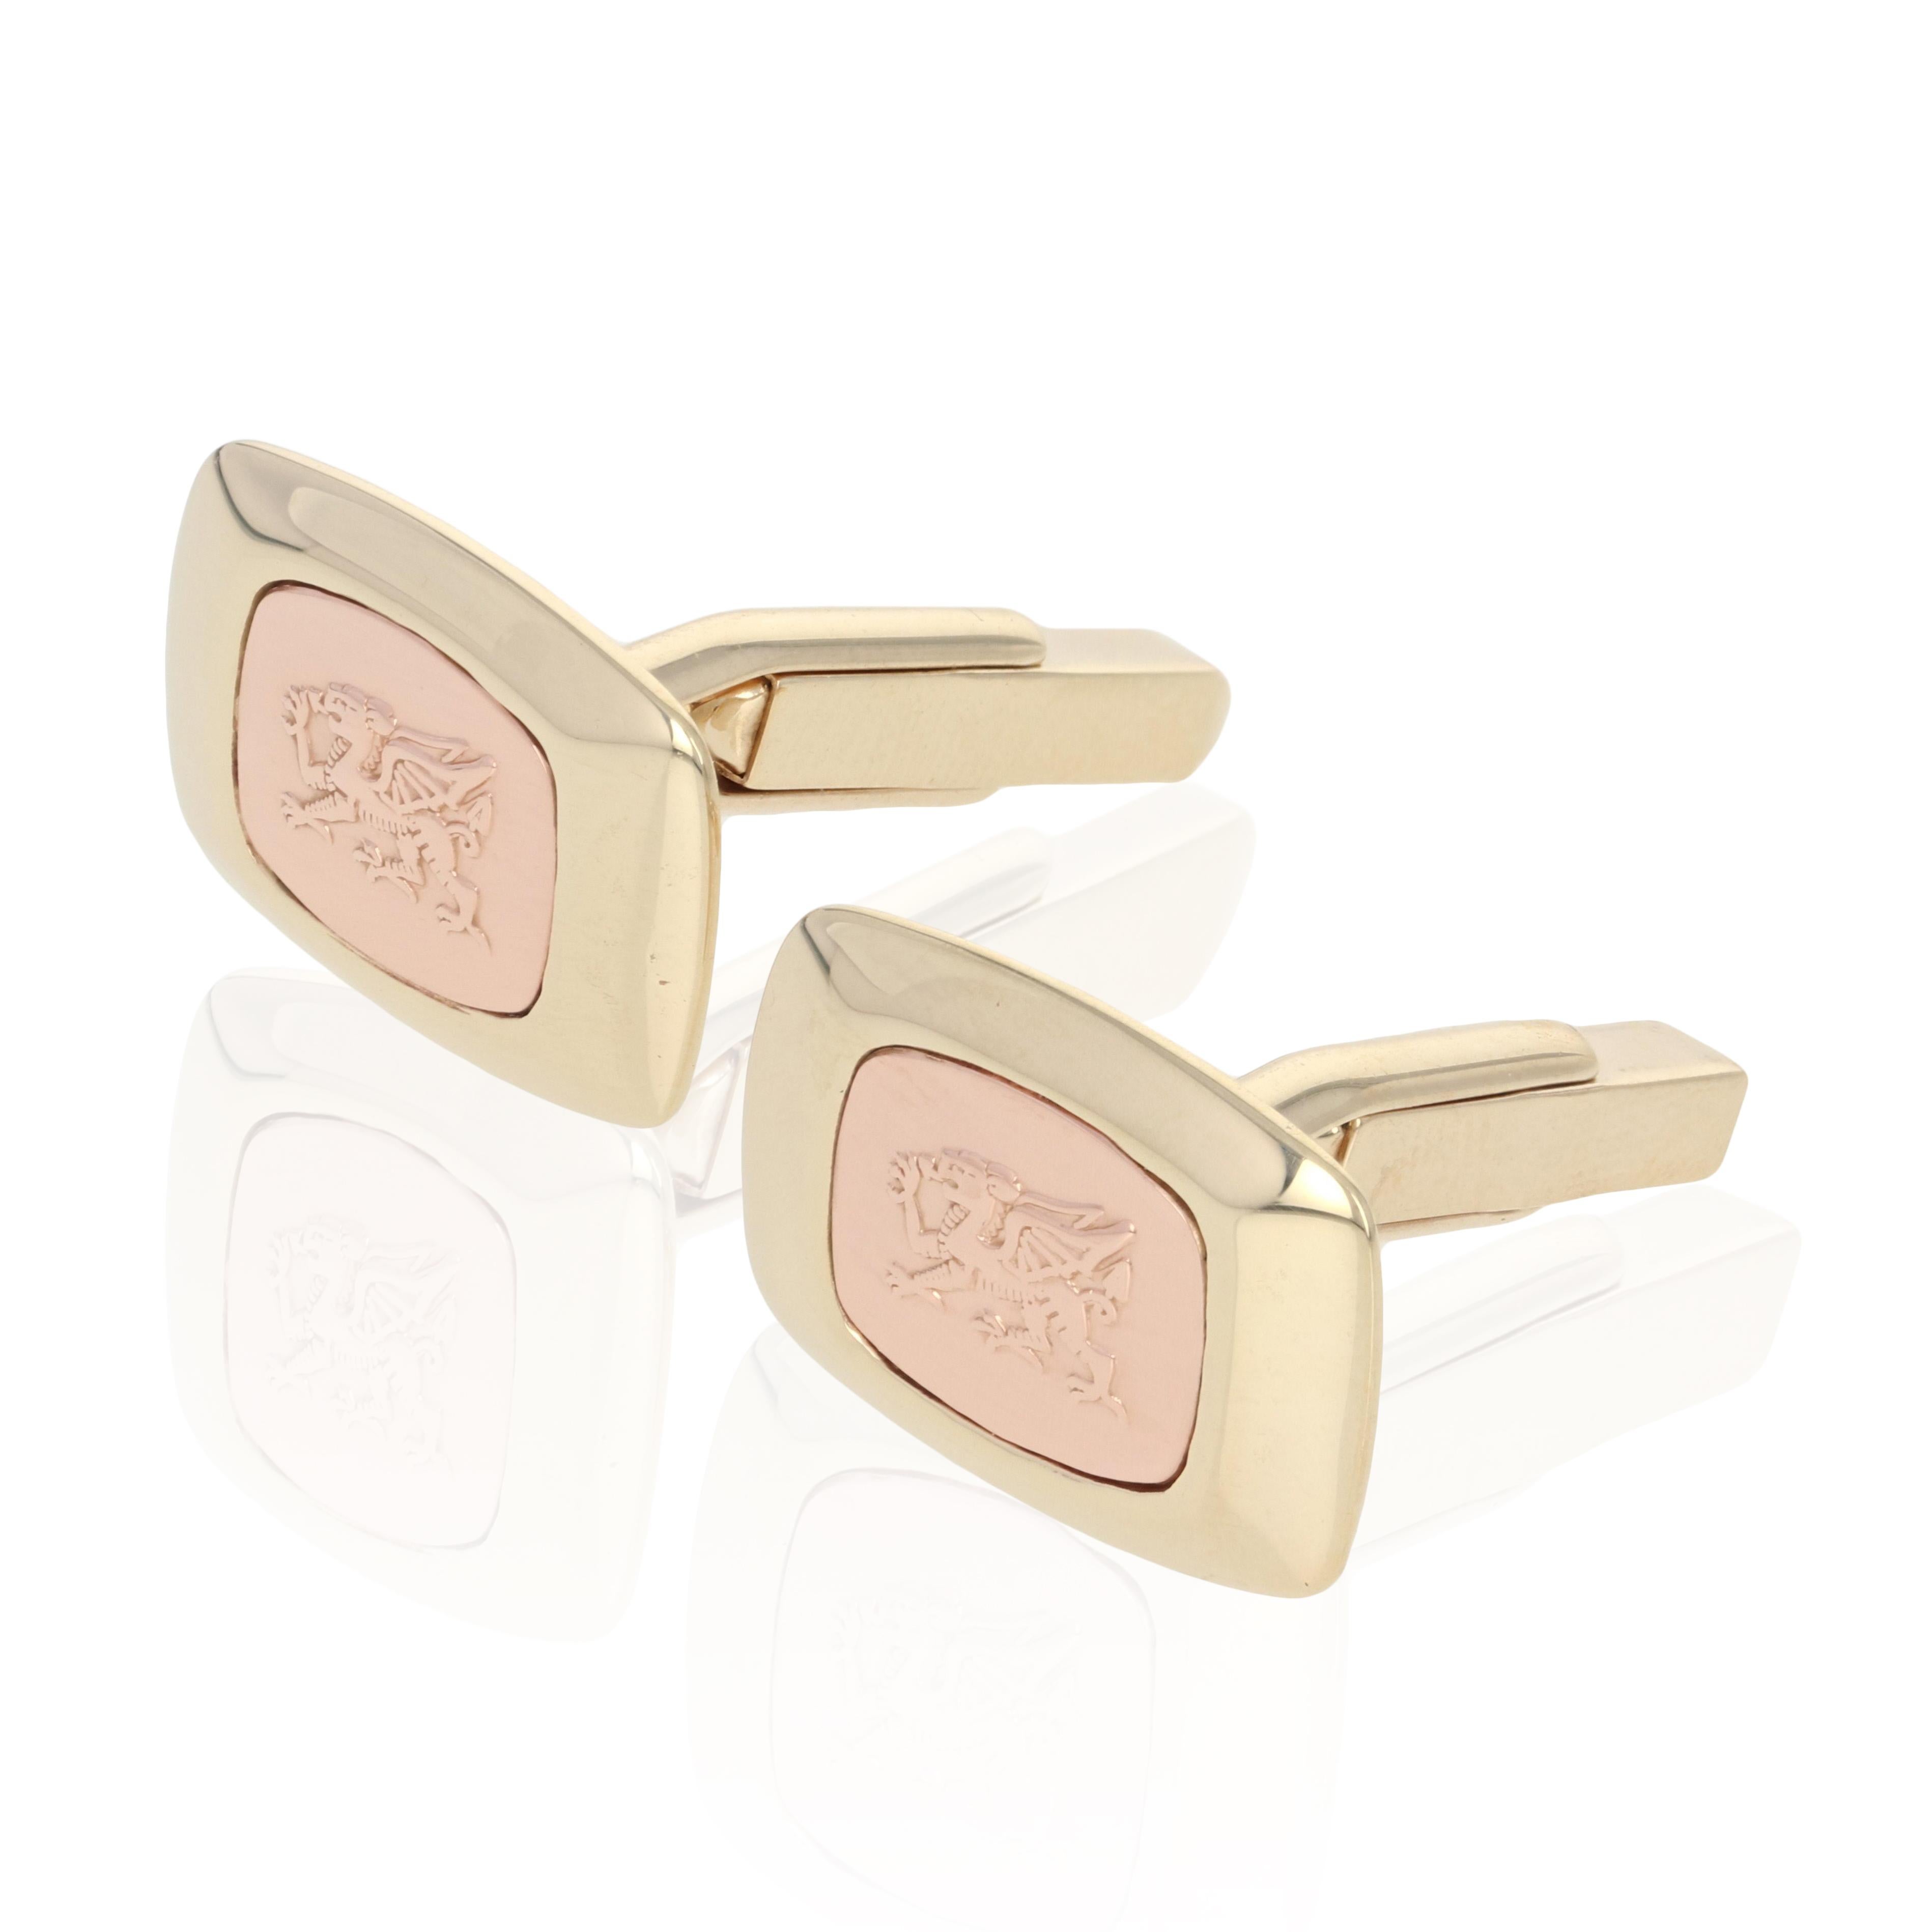 Metal Content: Guaranteed 9k Gold as stamped (yellow and rose)
Each Cufflink's Face: 17/32